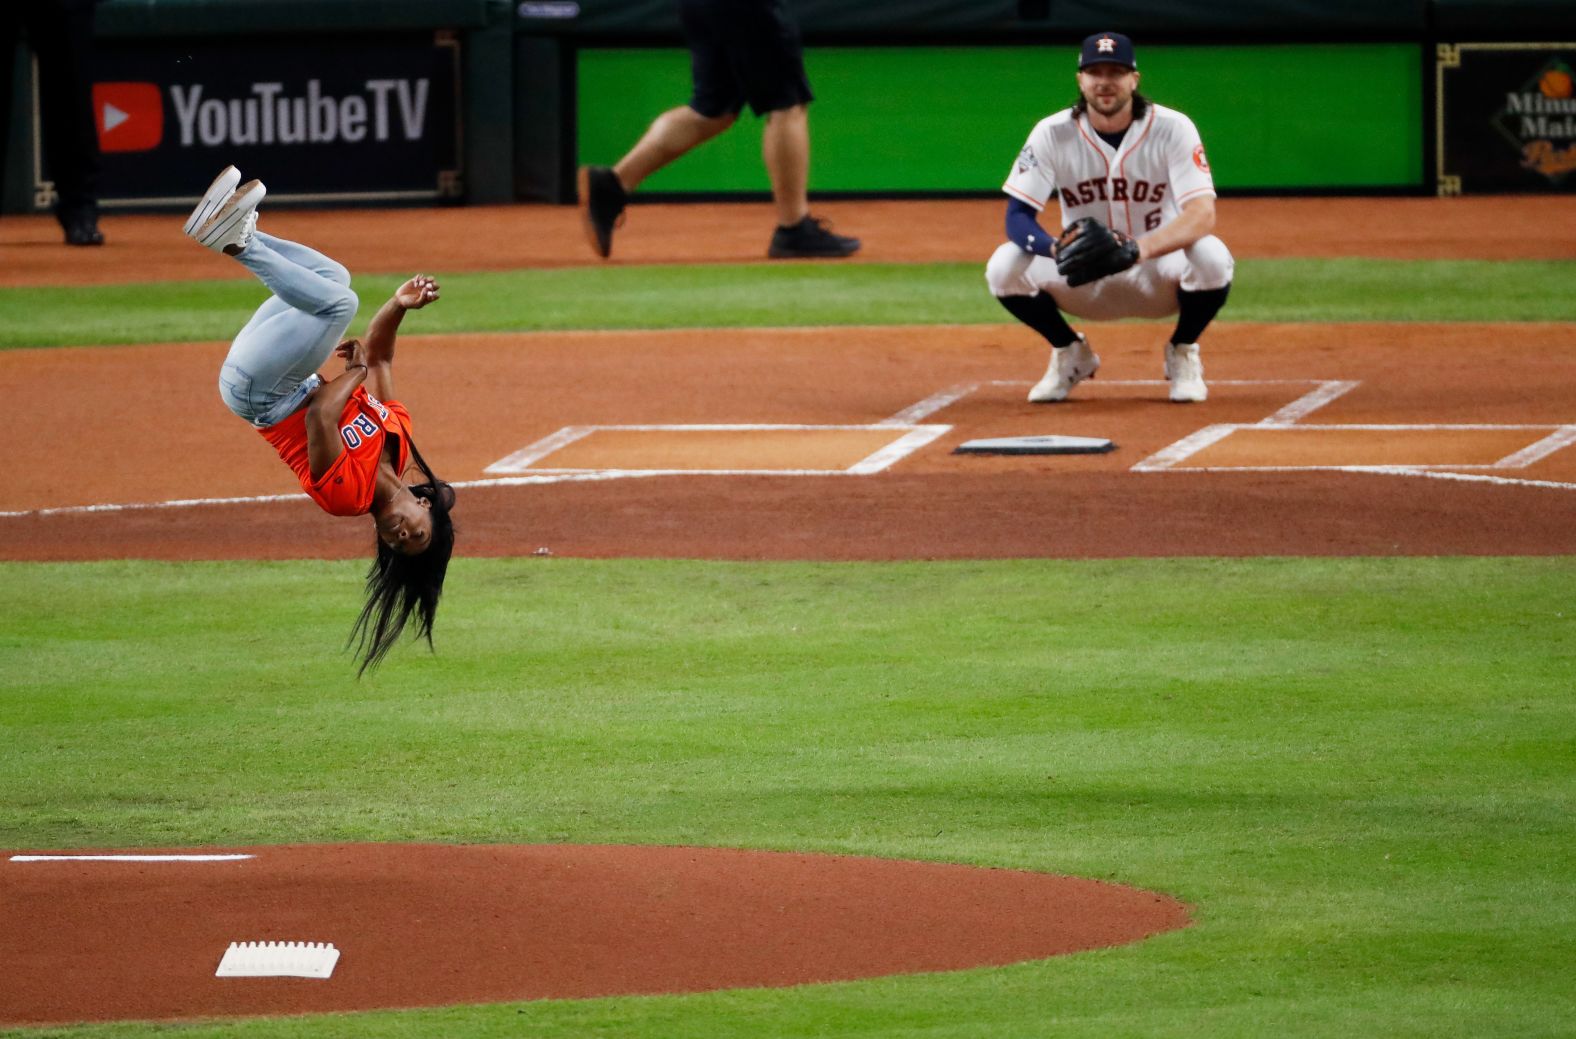 World champion gymnast Simone Biles performs a flip before throwing out the first pitch for Game 2.